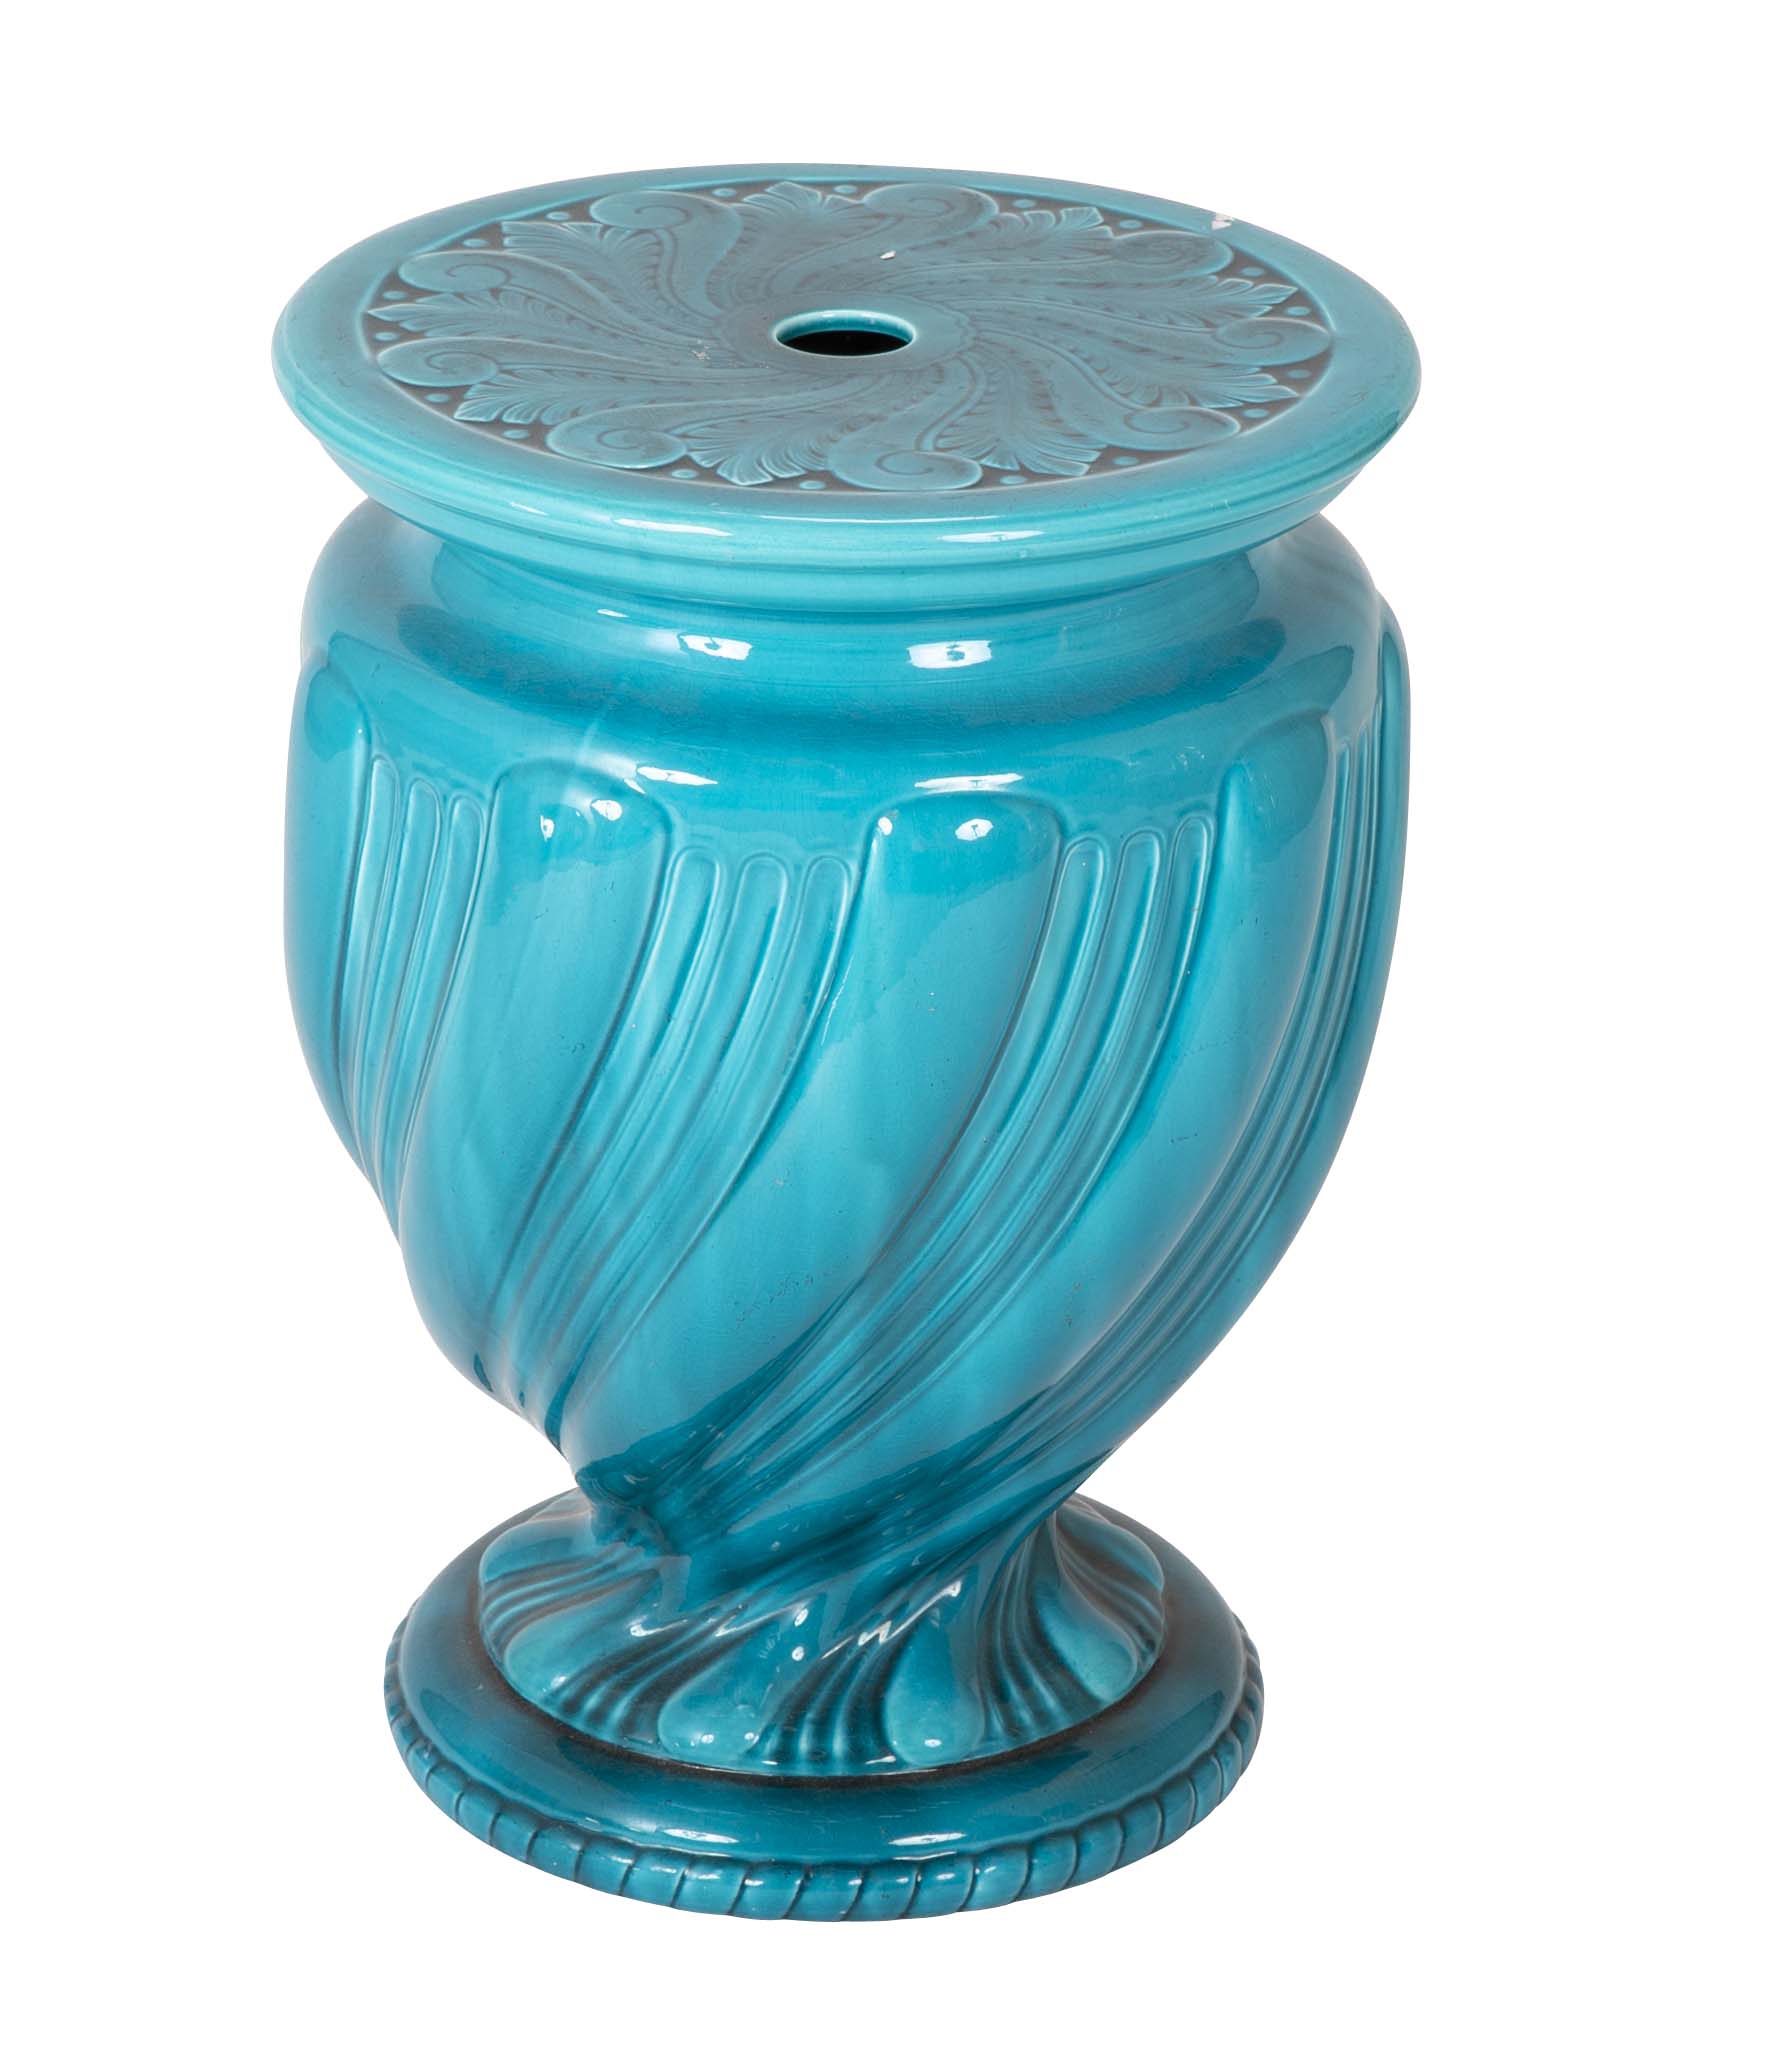 An English Majolica Turquoise Ground Garden Seat by Minton